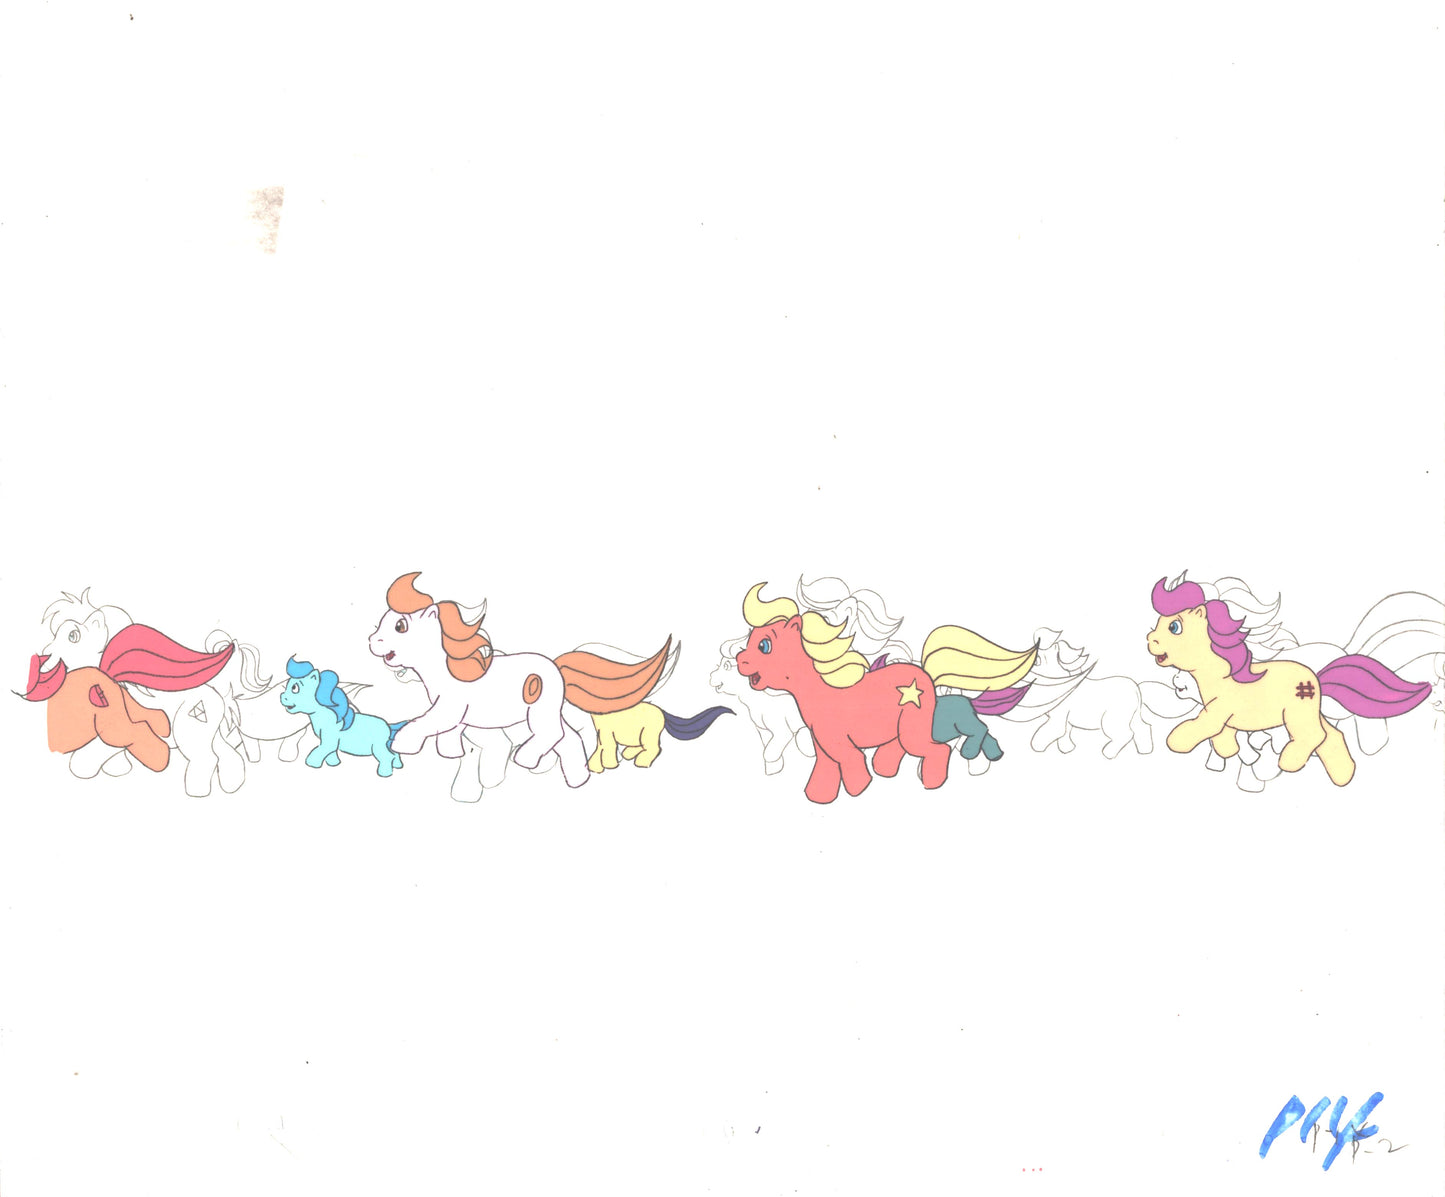 My Little Pony Original Production Animation Cel Hasbro Sunbow 1980s or 90s Used to Make the Cartoon G-P14